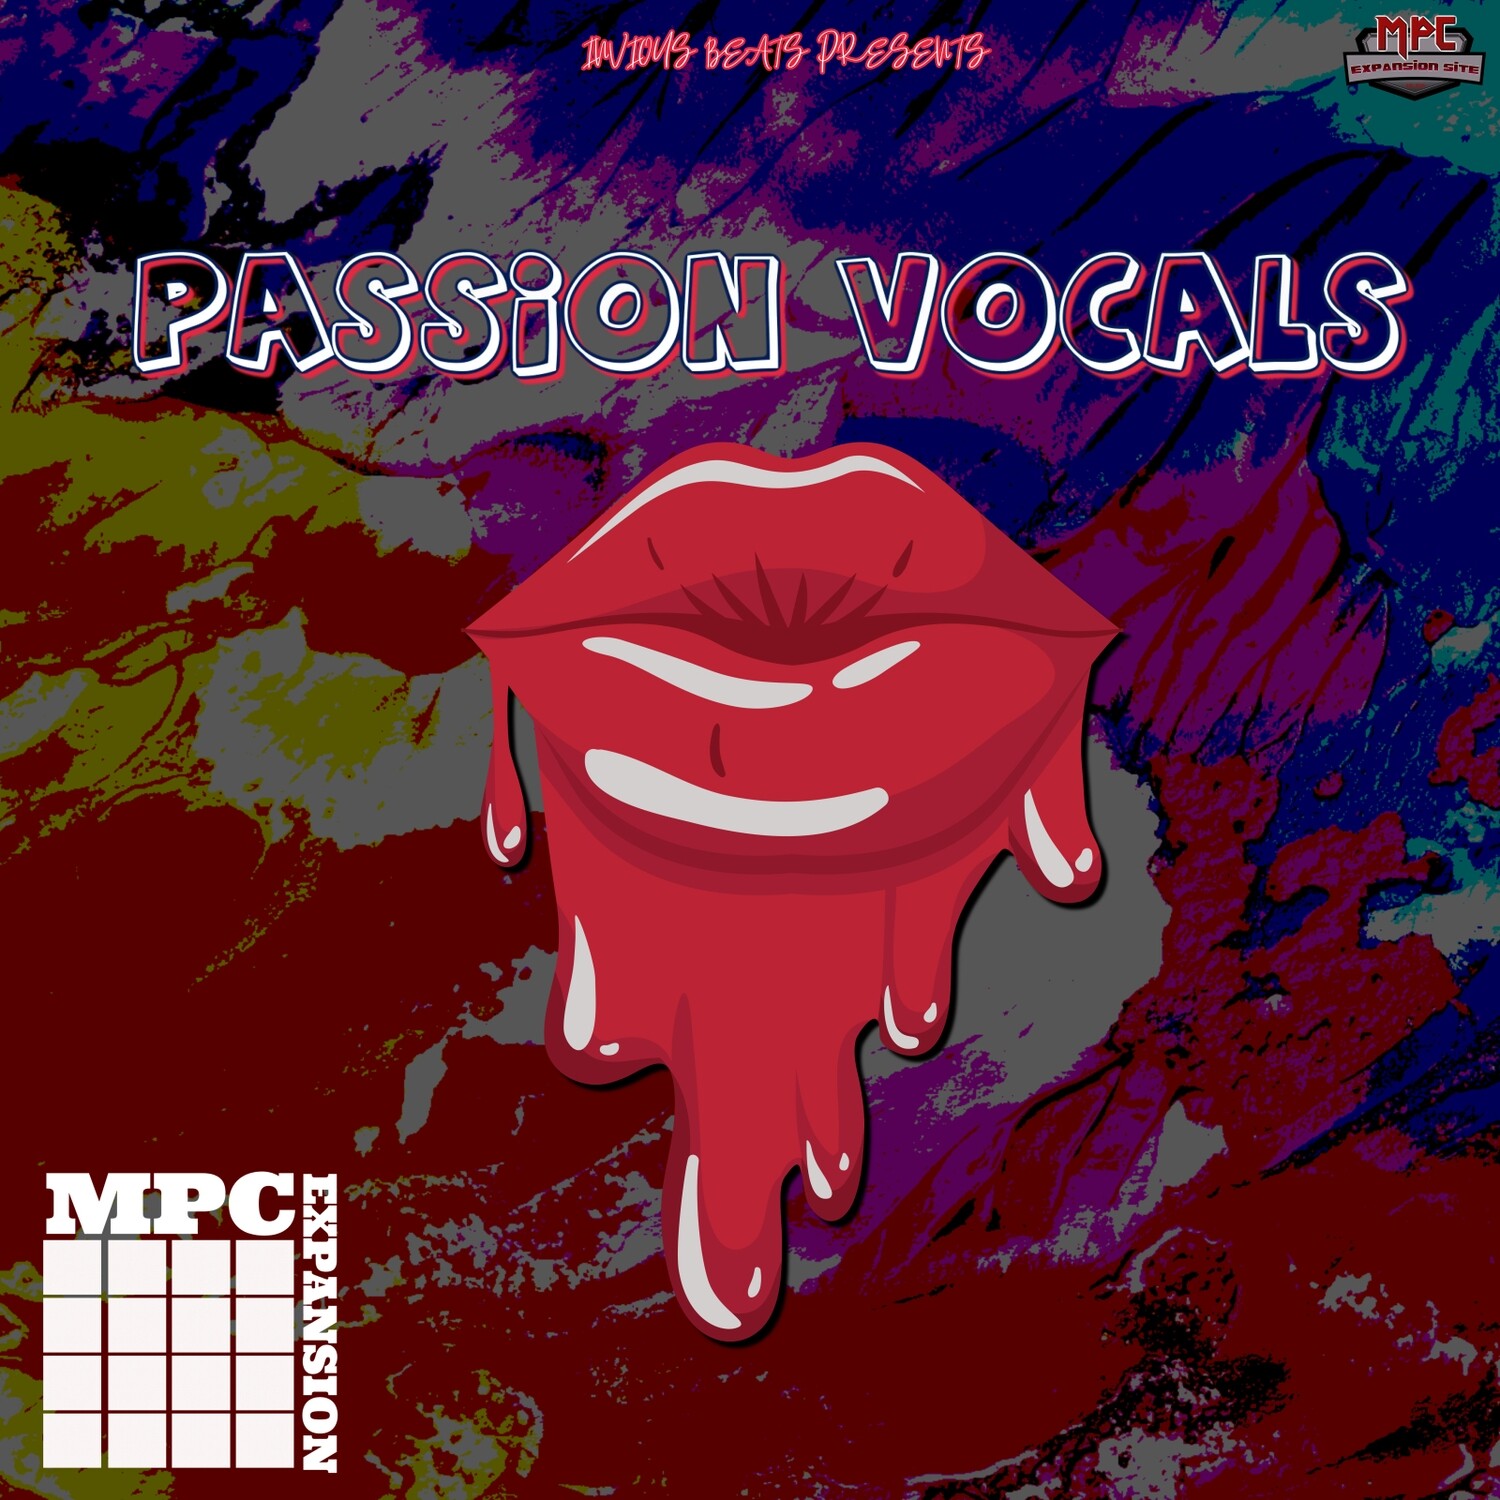 MPC EXPANSION 'PASSION VOCALS' by INVIOUS